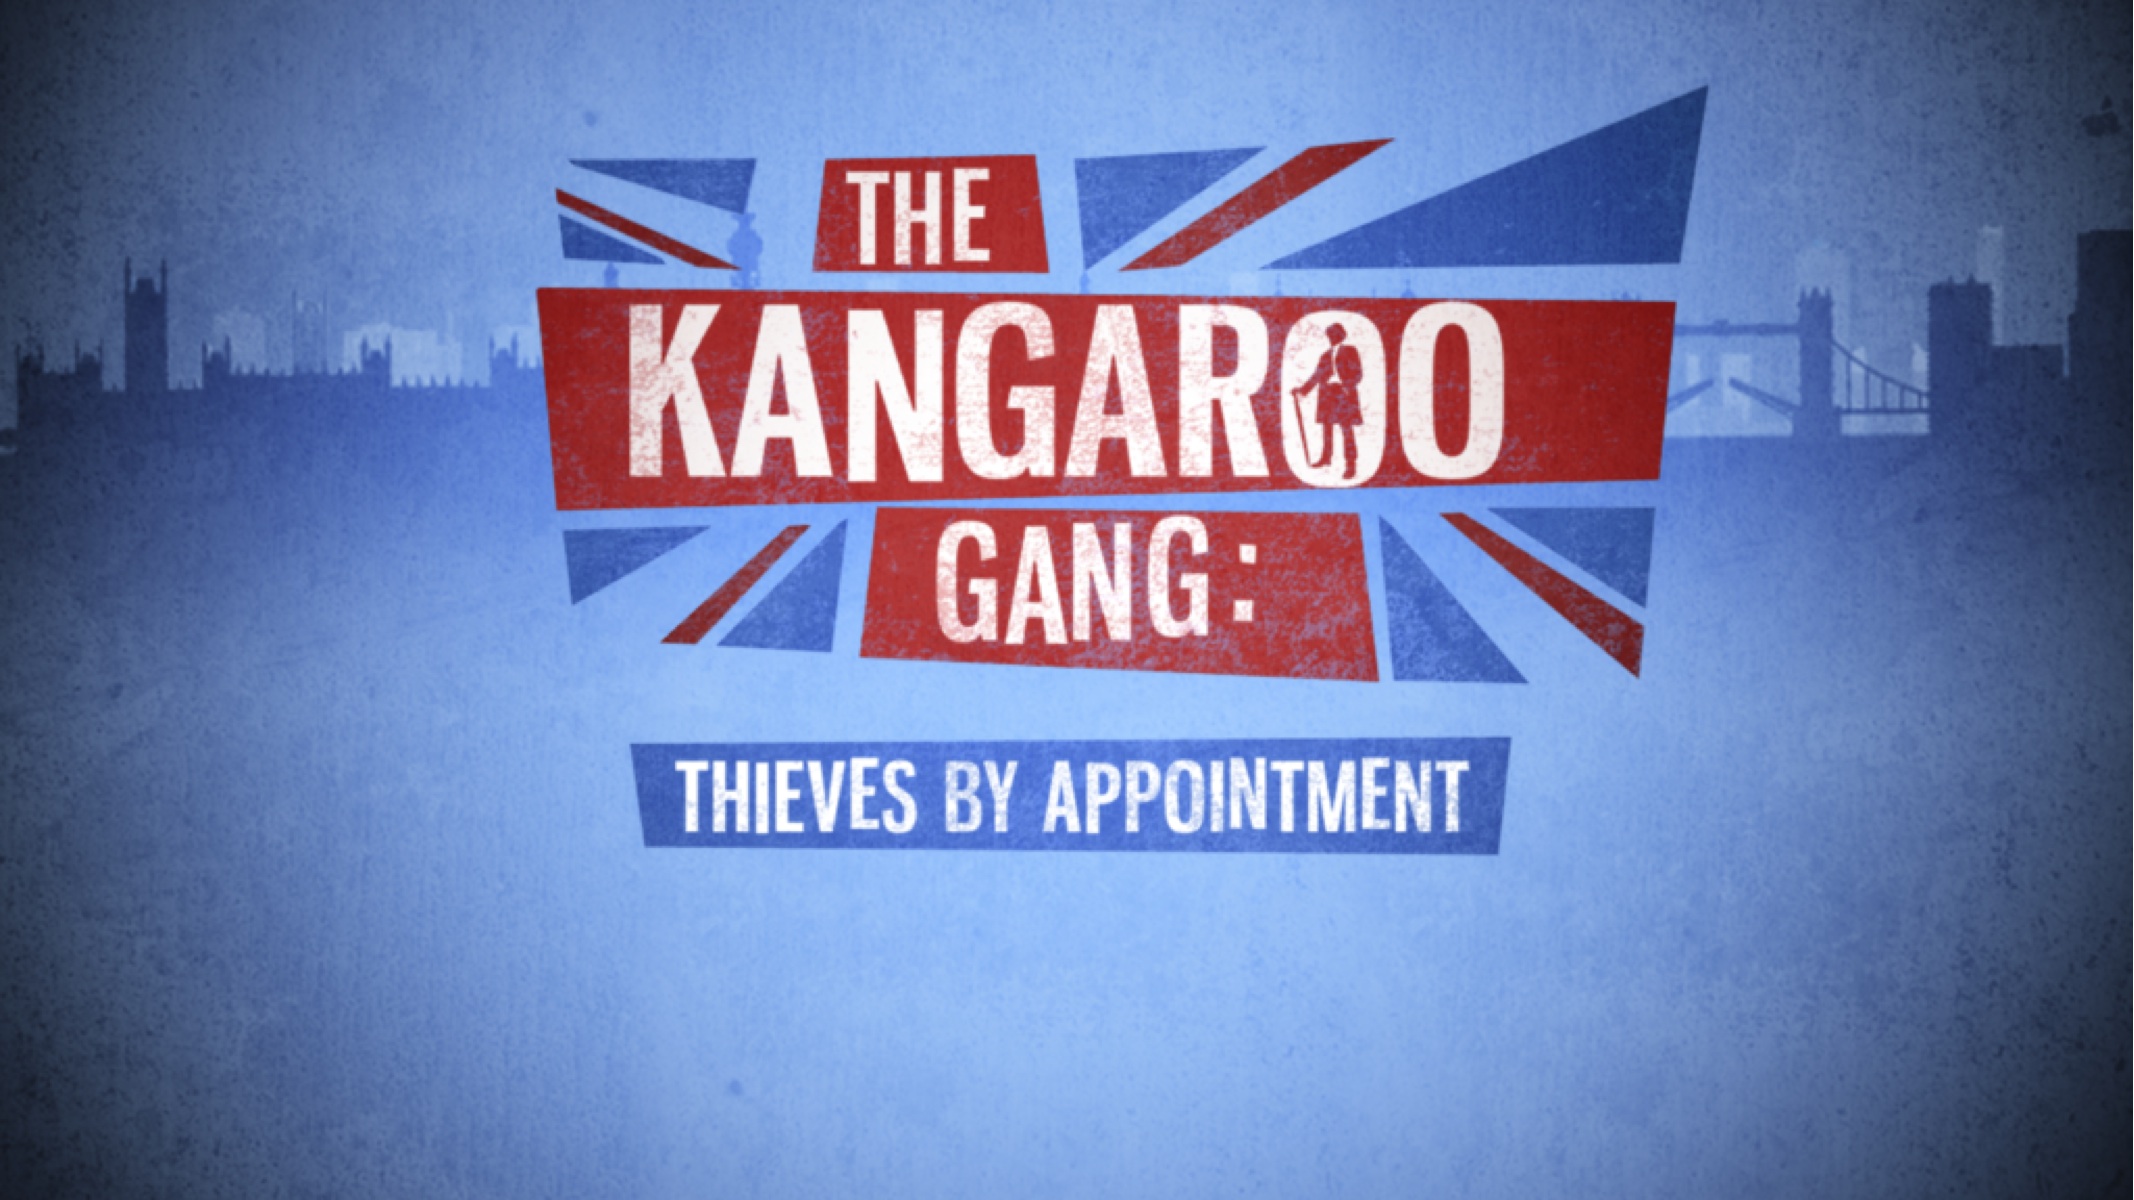 PRODUCER OF THE KANGAROO GANG:THIEVES BY APPOINTMENT